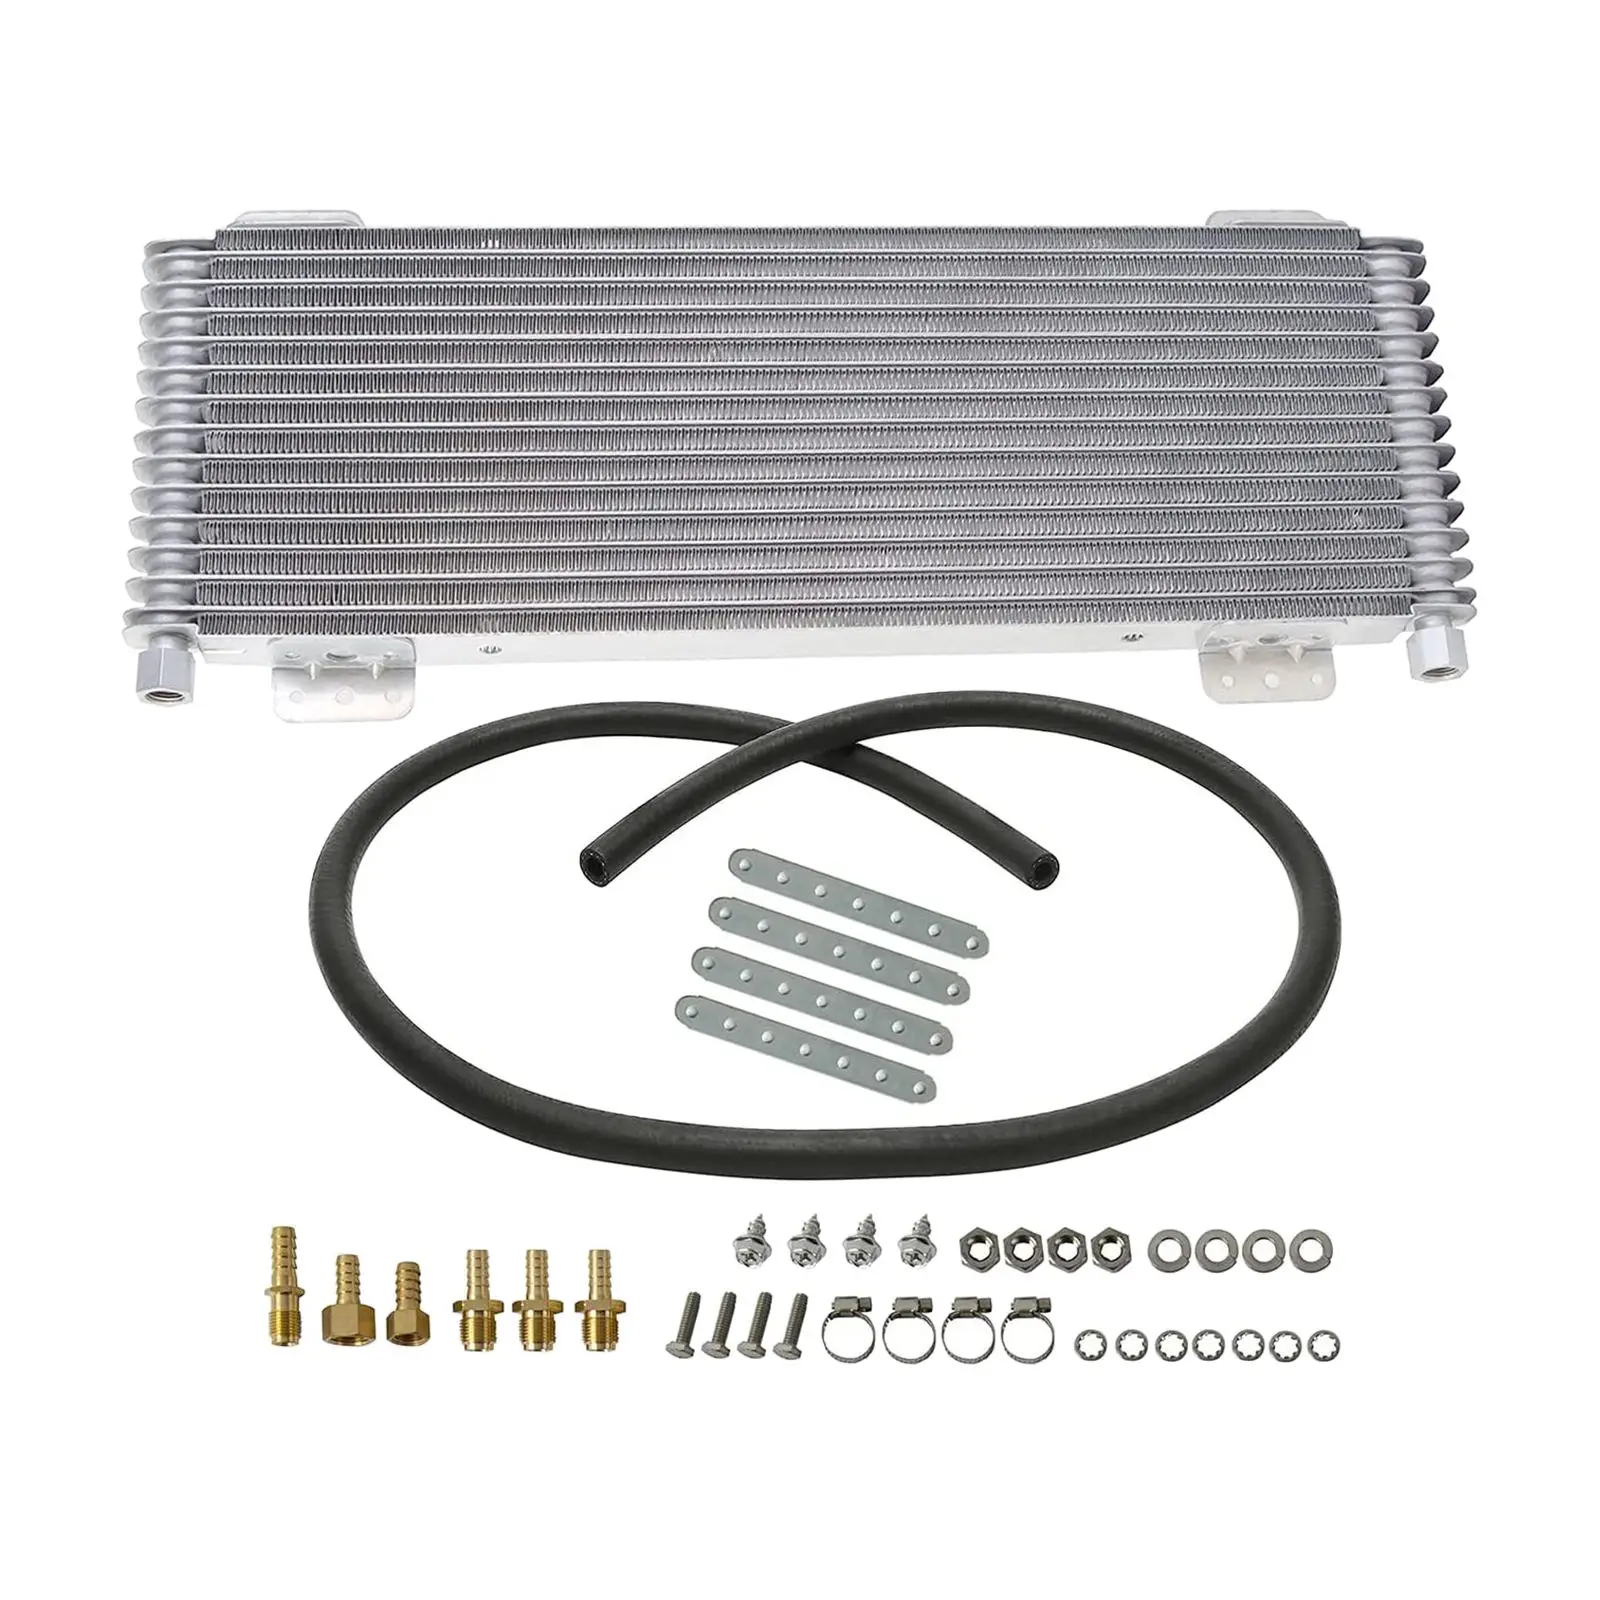 Heavy Duty Transmission Oil Cooler Low Pressure Drop LPD47391 with Mounting Hardware Cooling Protection Towing Applications